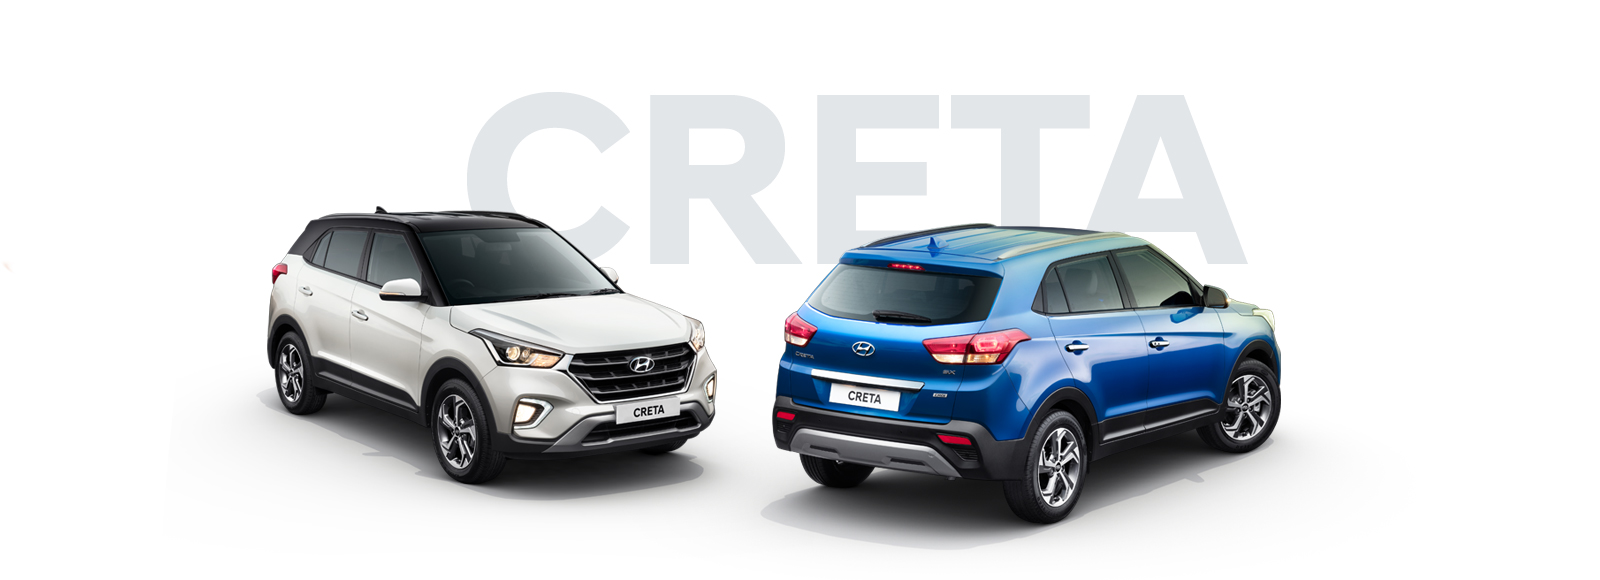 Side view of white Creta in front and navy Creta parked behind with the text All-New-Creta on the background